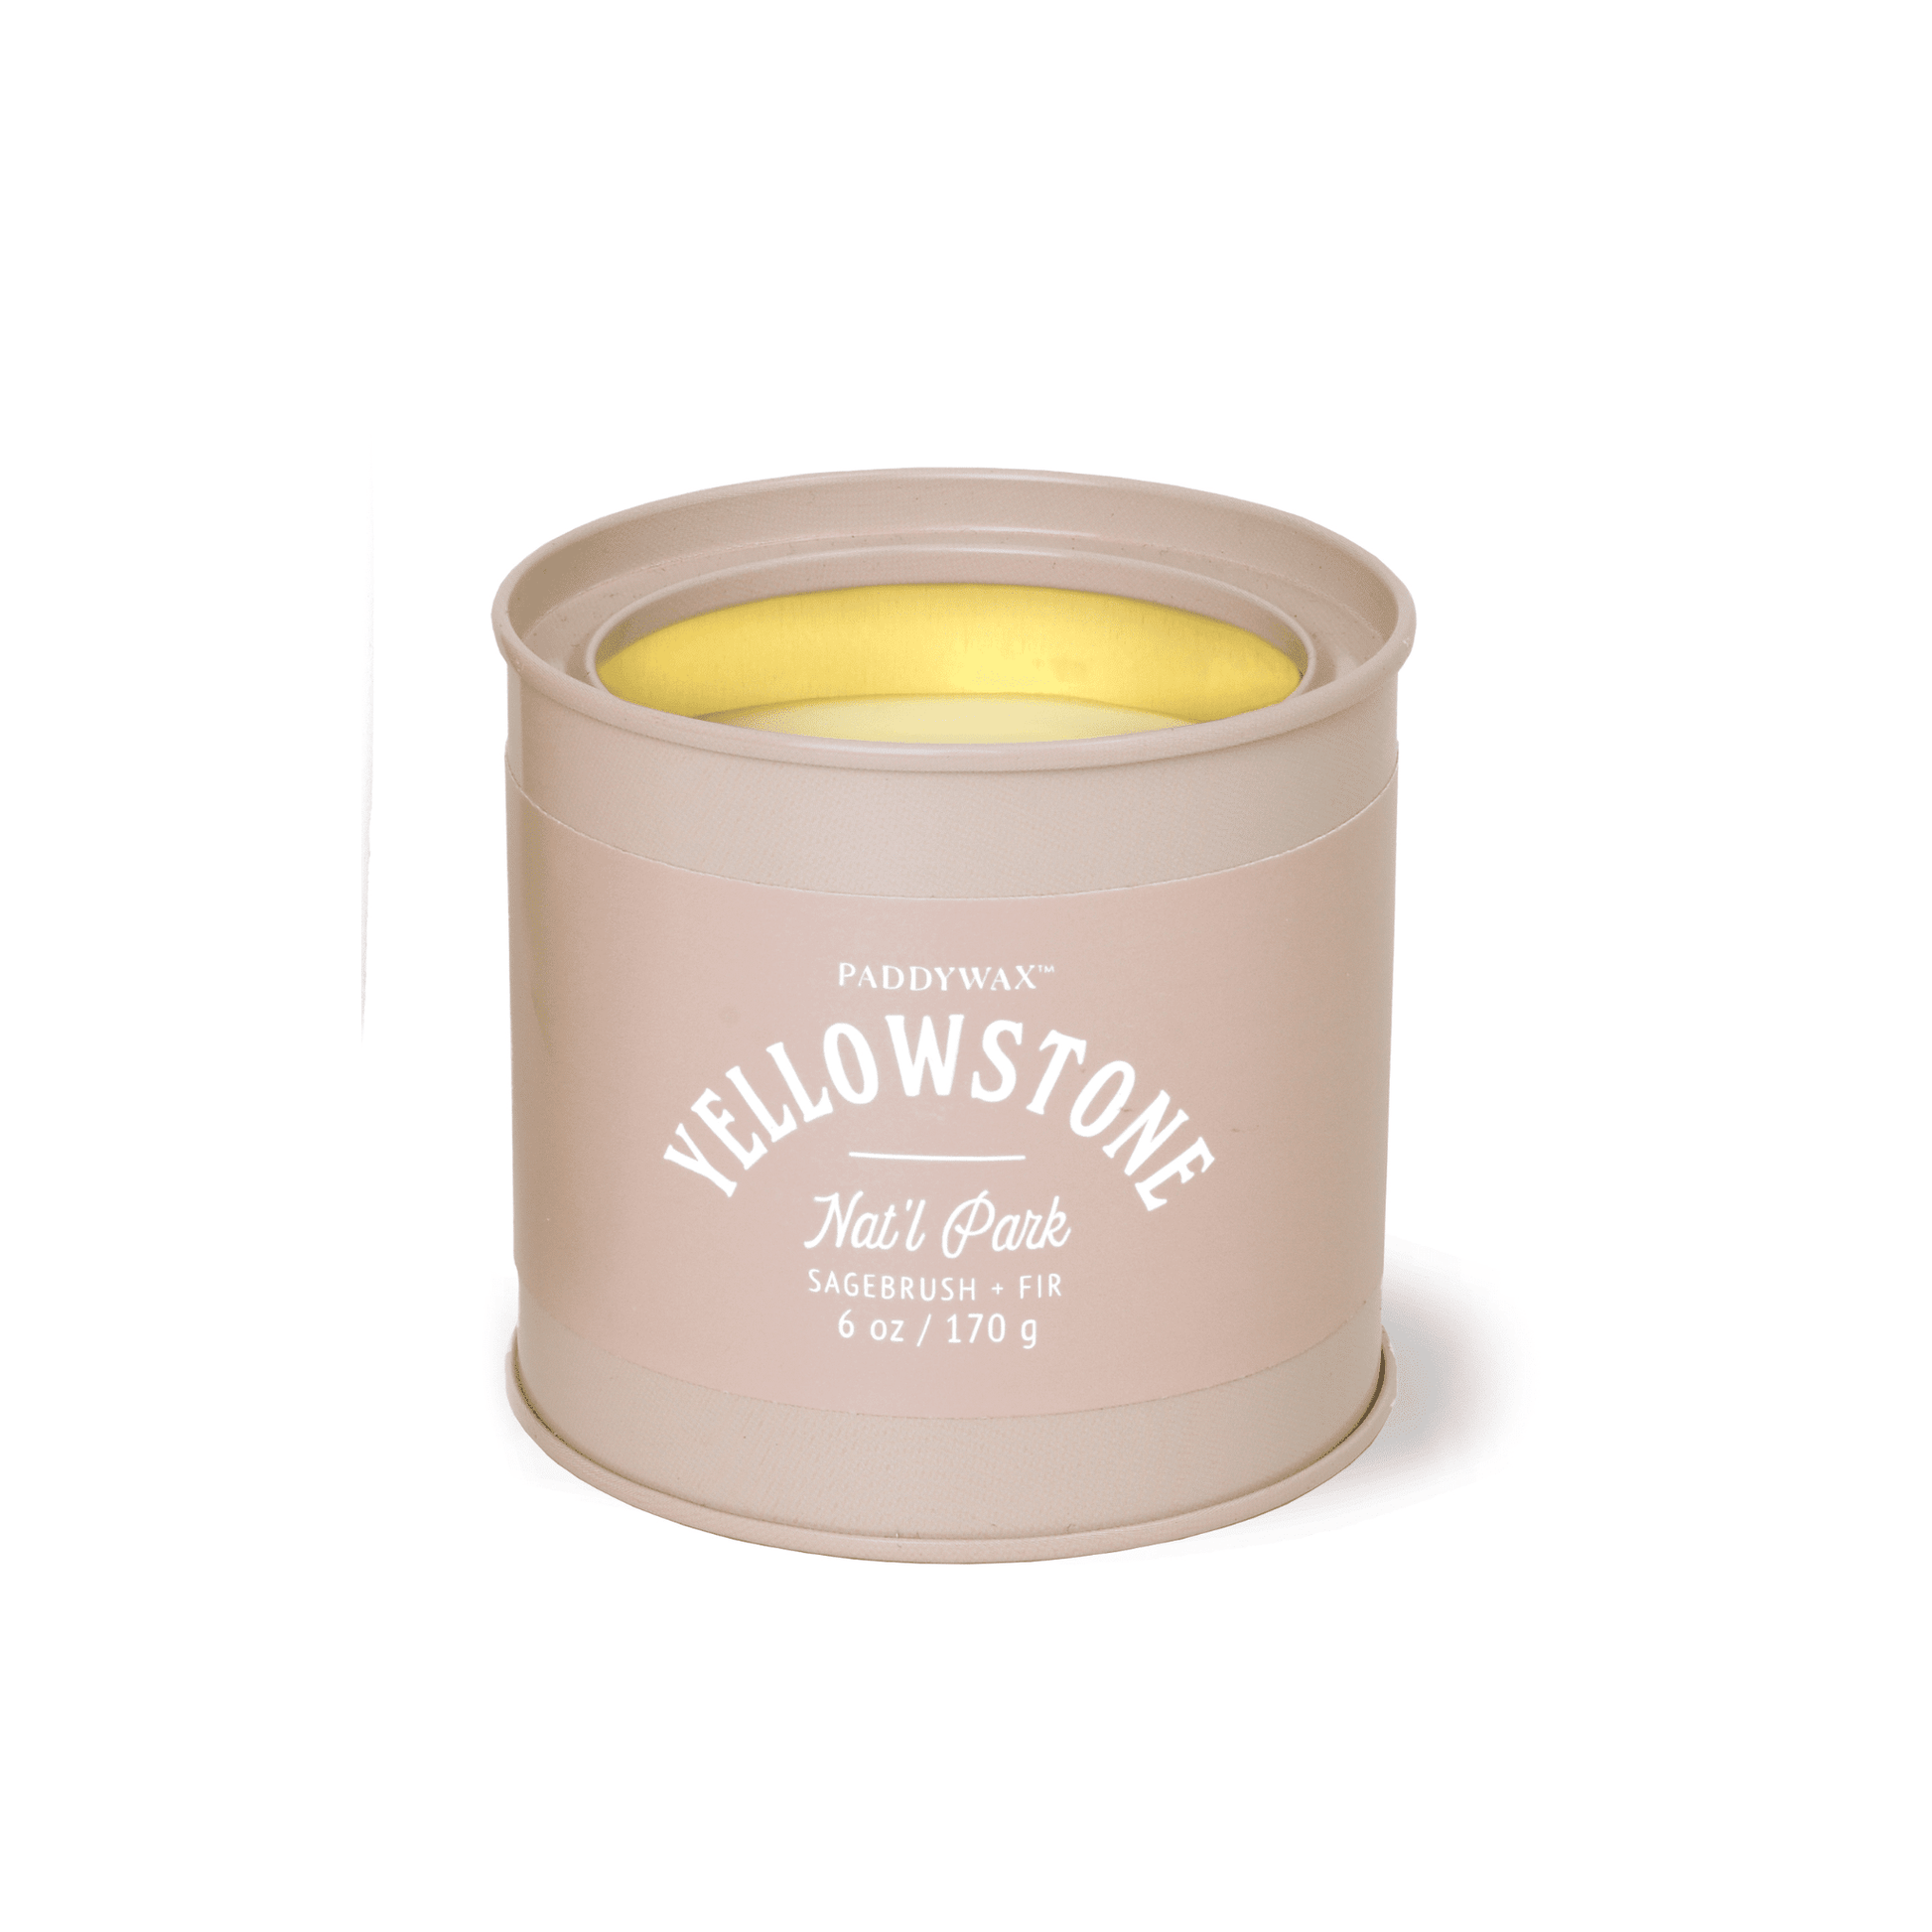 Parks 6oz Candle - Sagebrush +Fir candle on a white background.